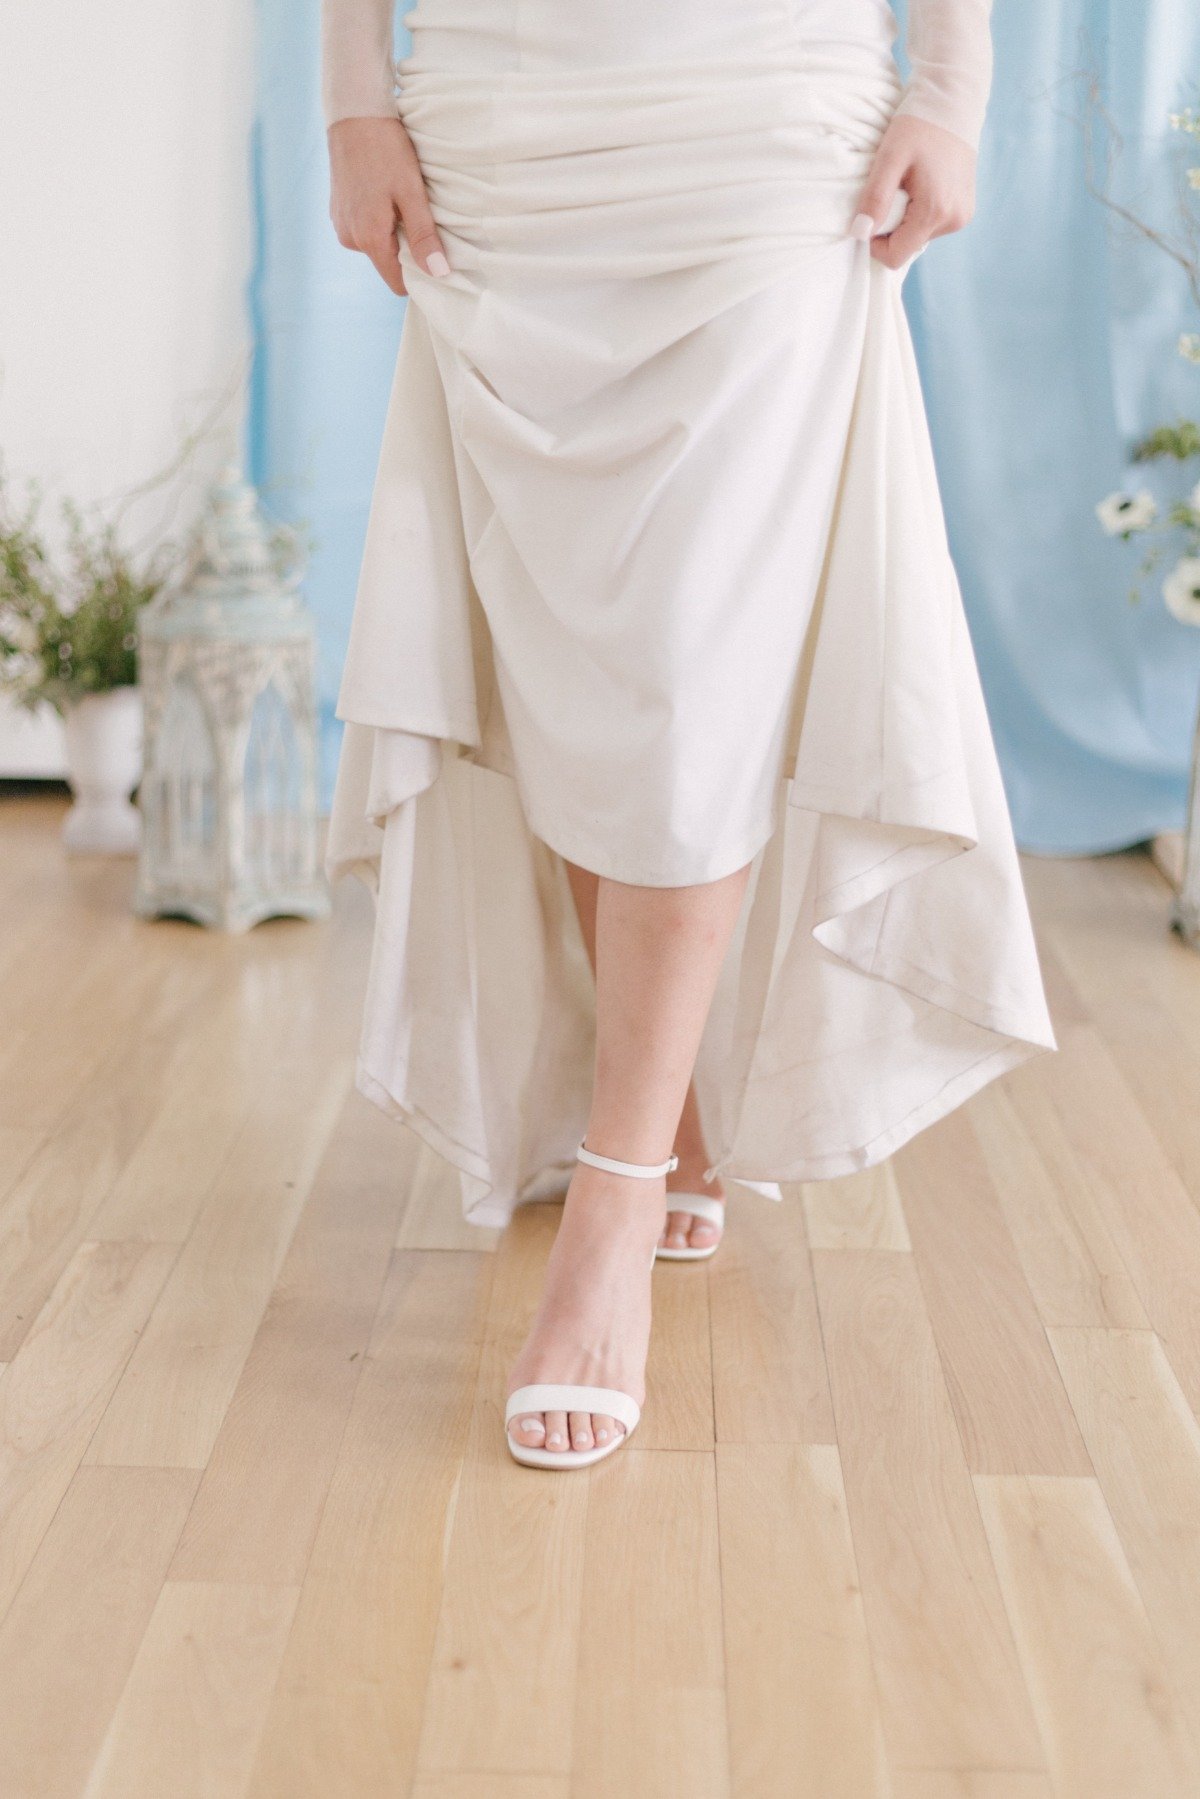 white strapy wedding shoes